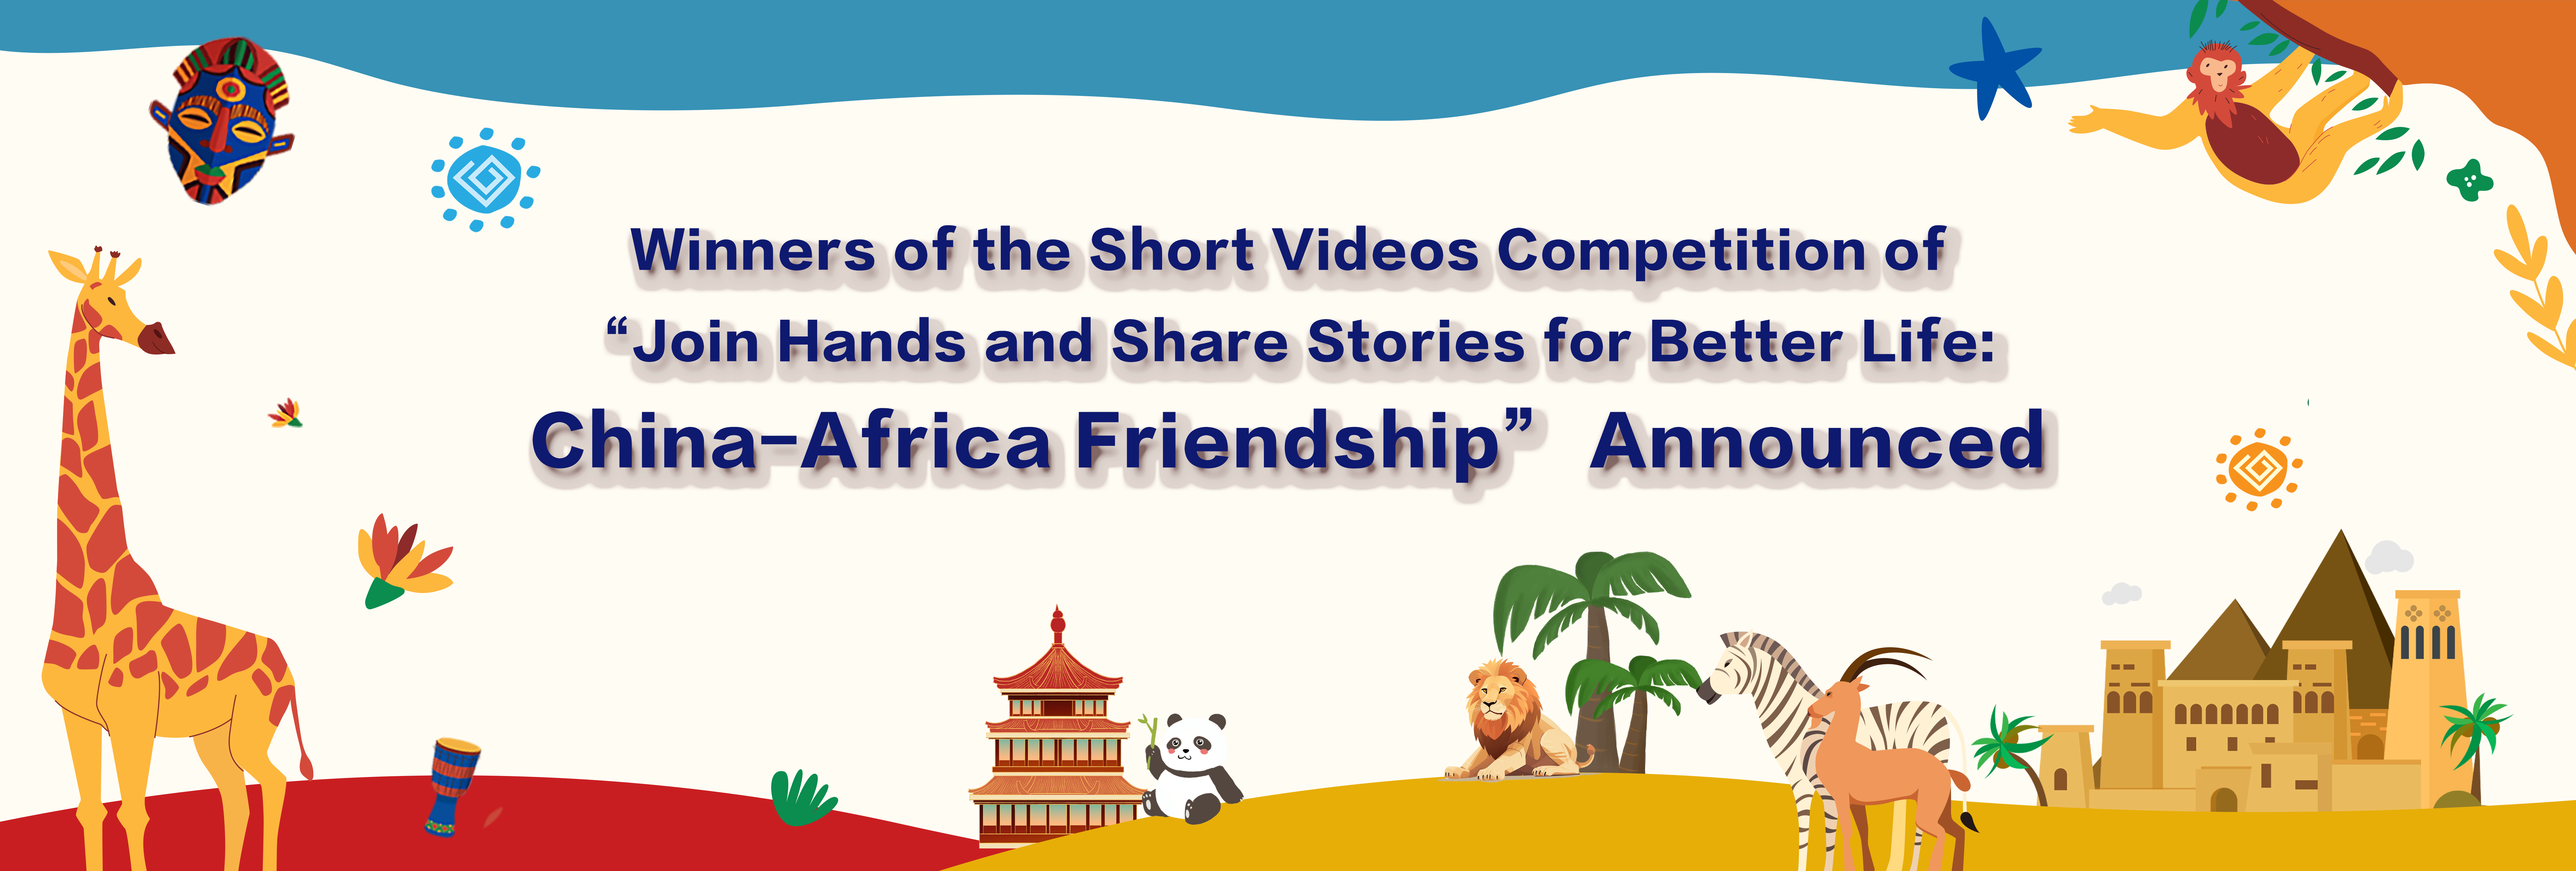 Winners of the Short Videos Competition of “Join Hands and Share Stories for Better Life: China-Africa Friendship”Announced